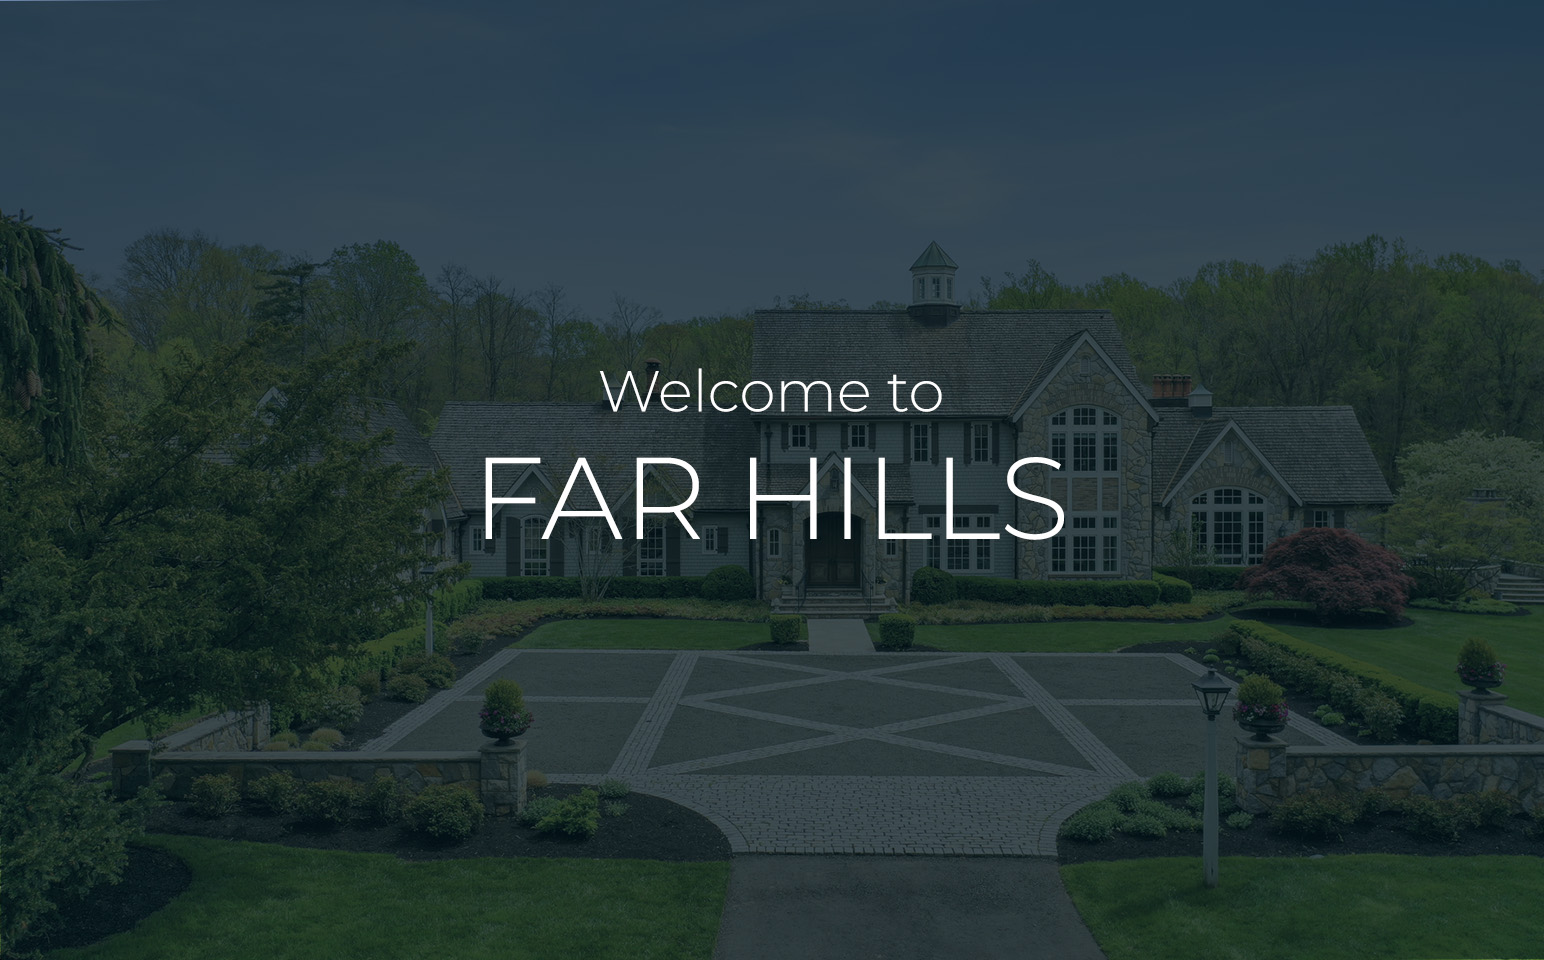 About Far Hills